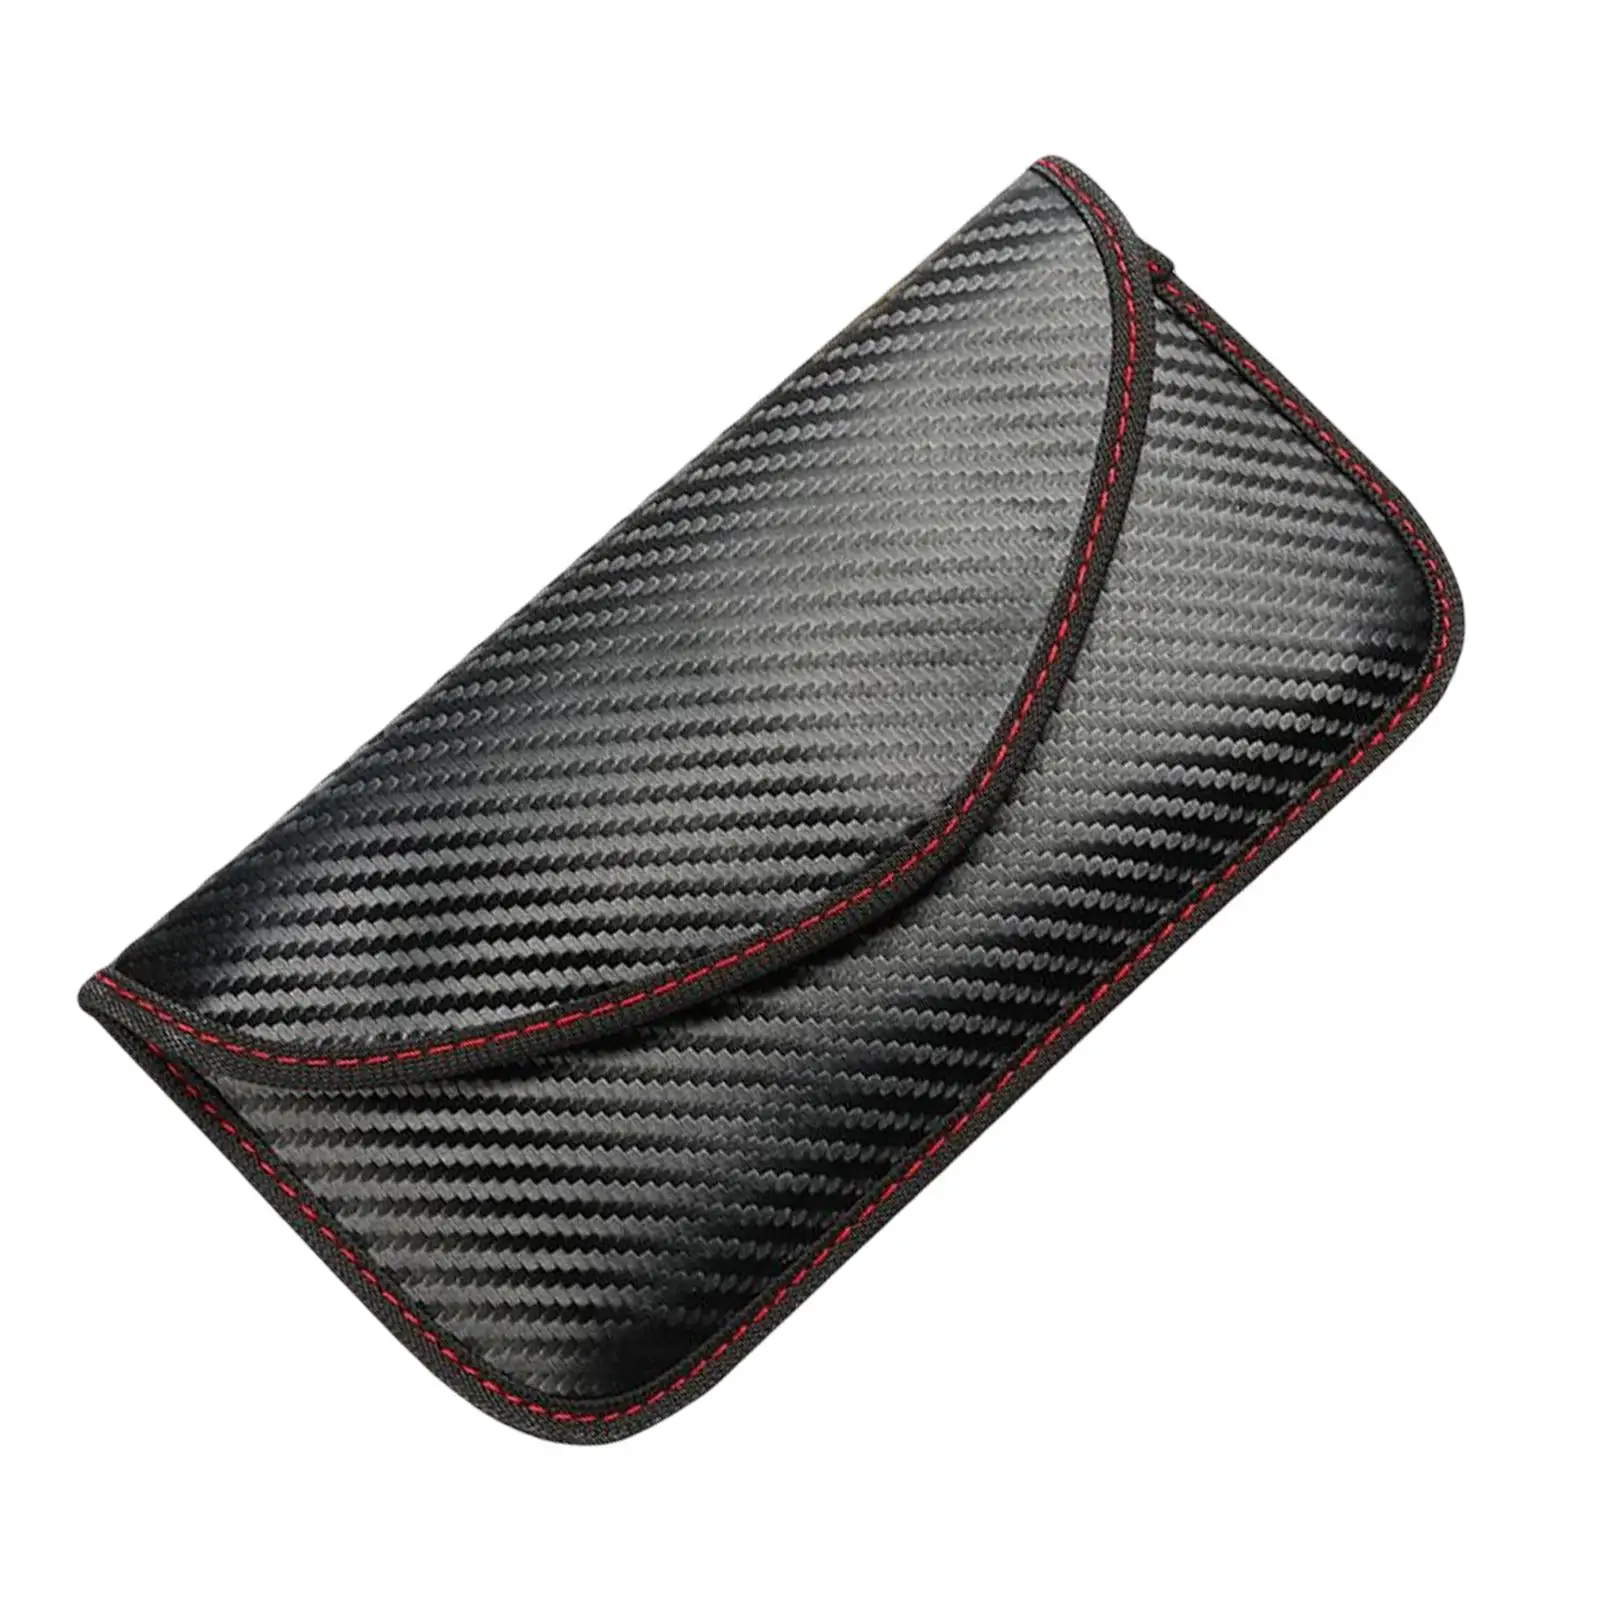 Carbon Fiber PU Faraday Blocking Pocket Protector Black Pouch Blocking Case for Keychain